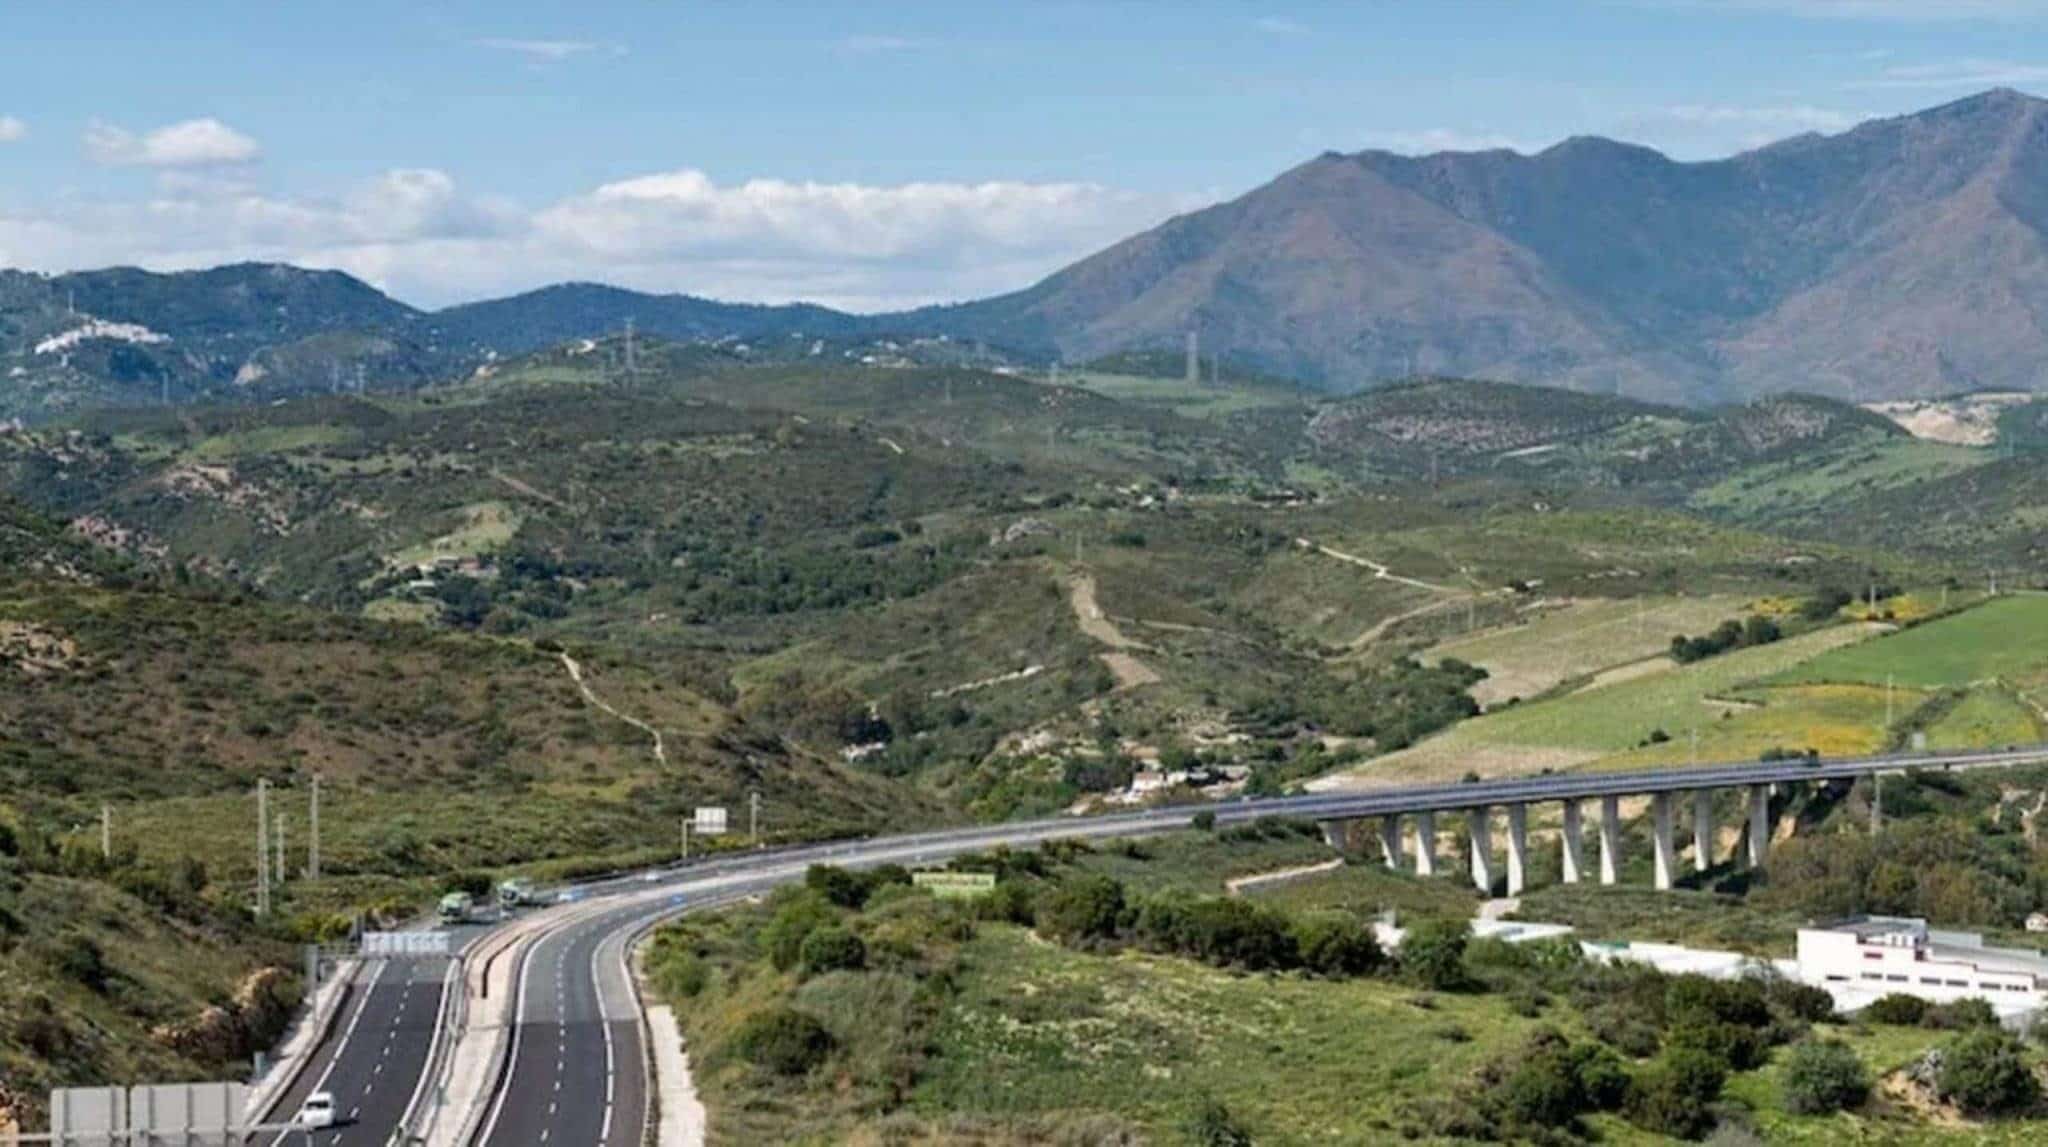 Highway stretching out into the countryside with mountains in background